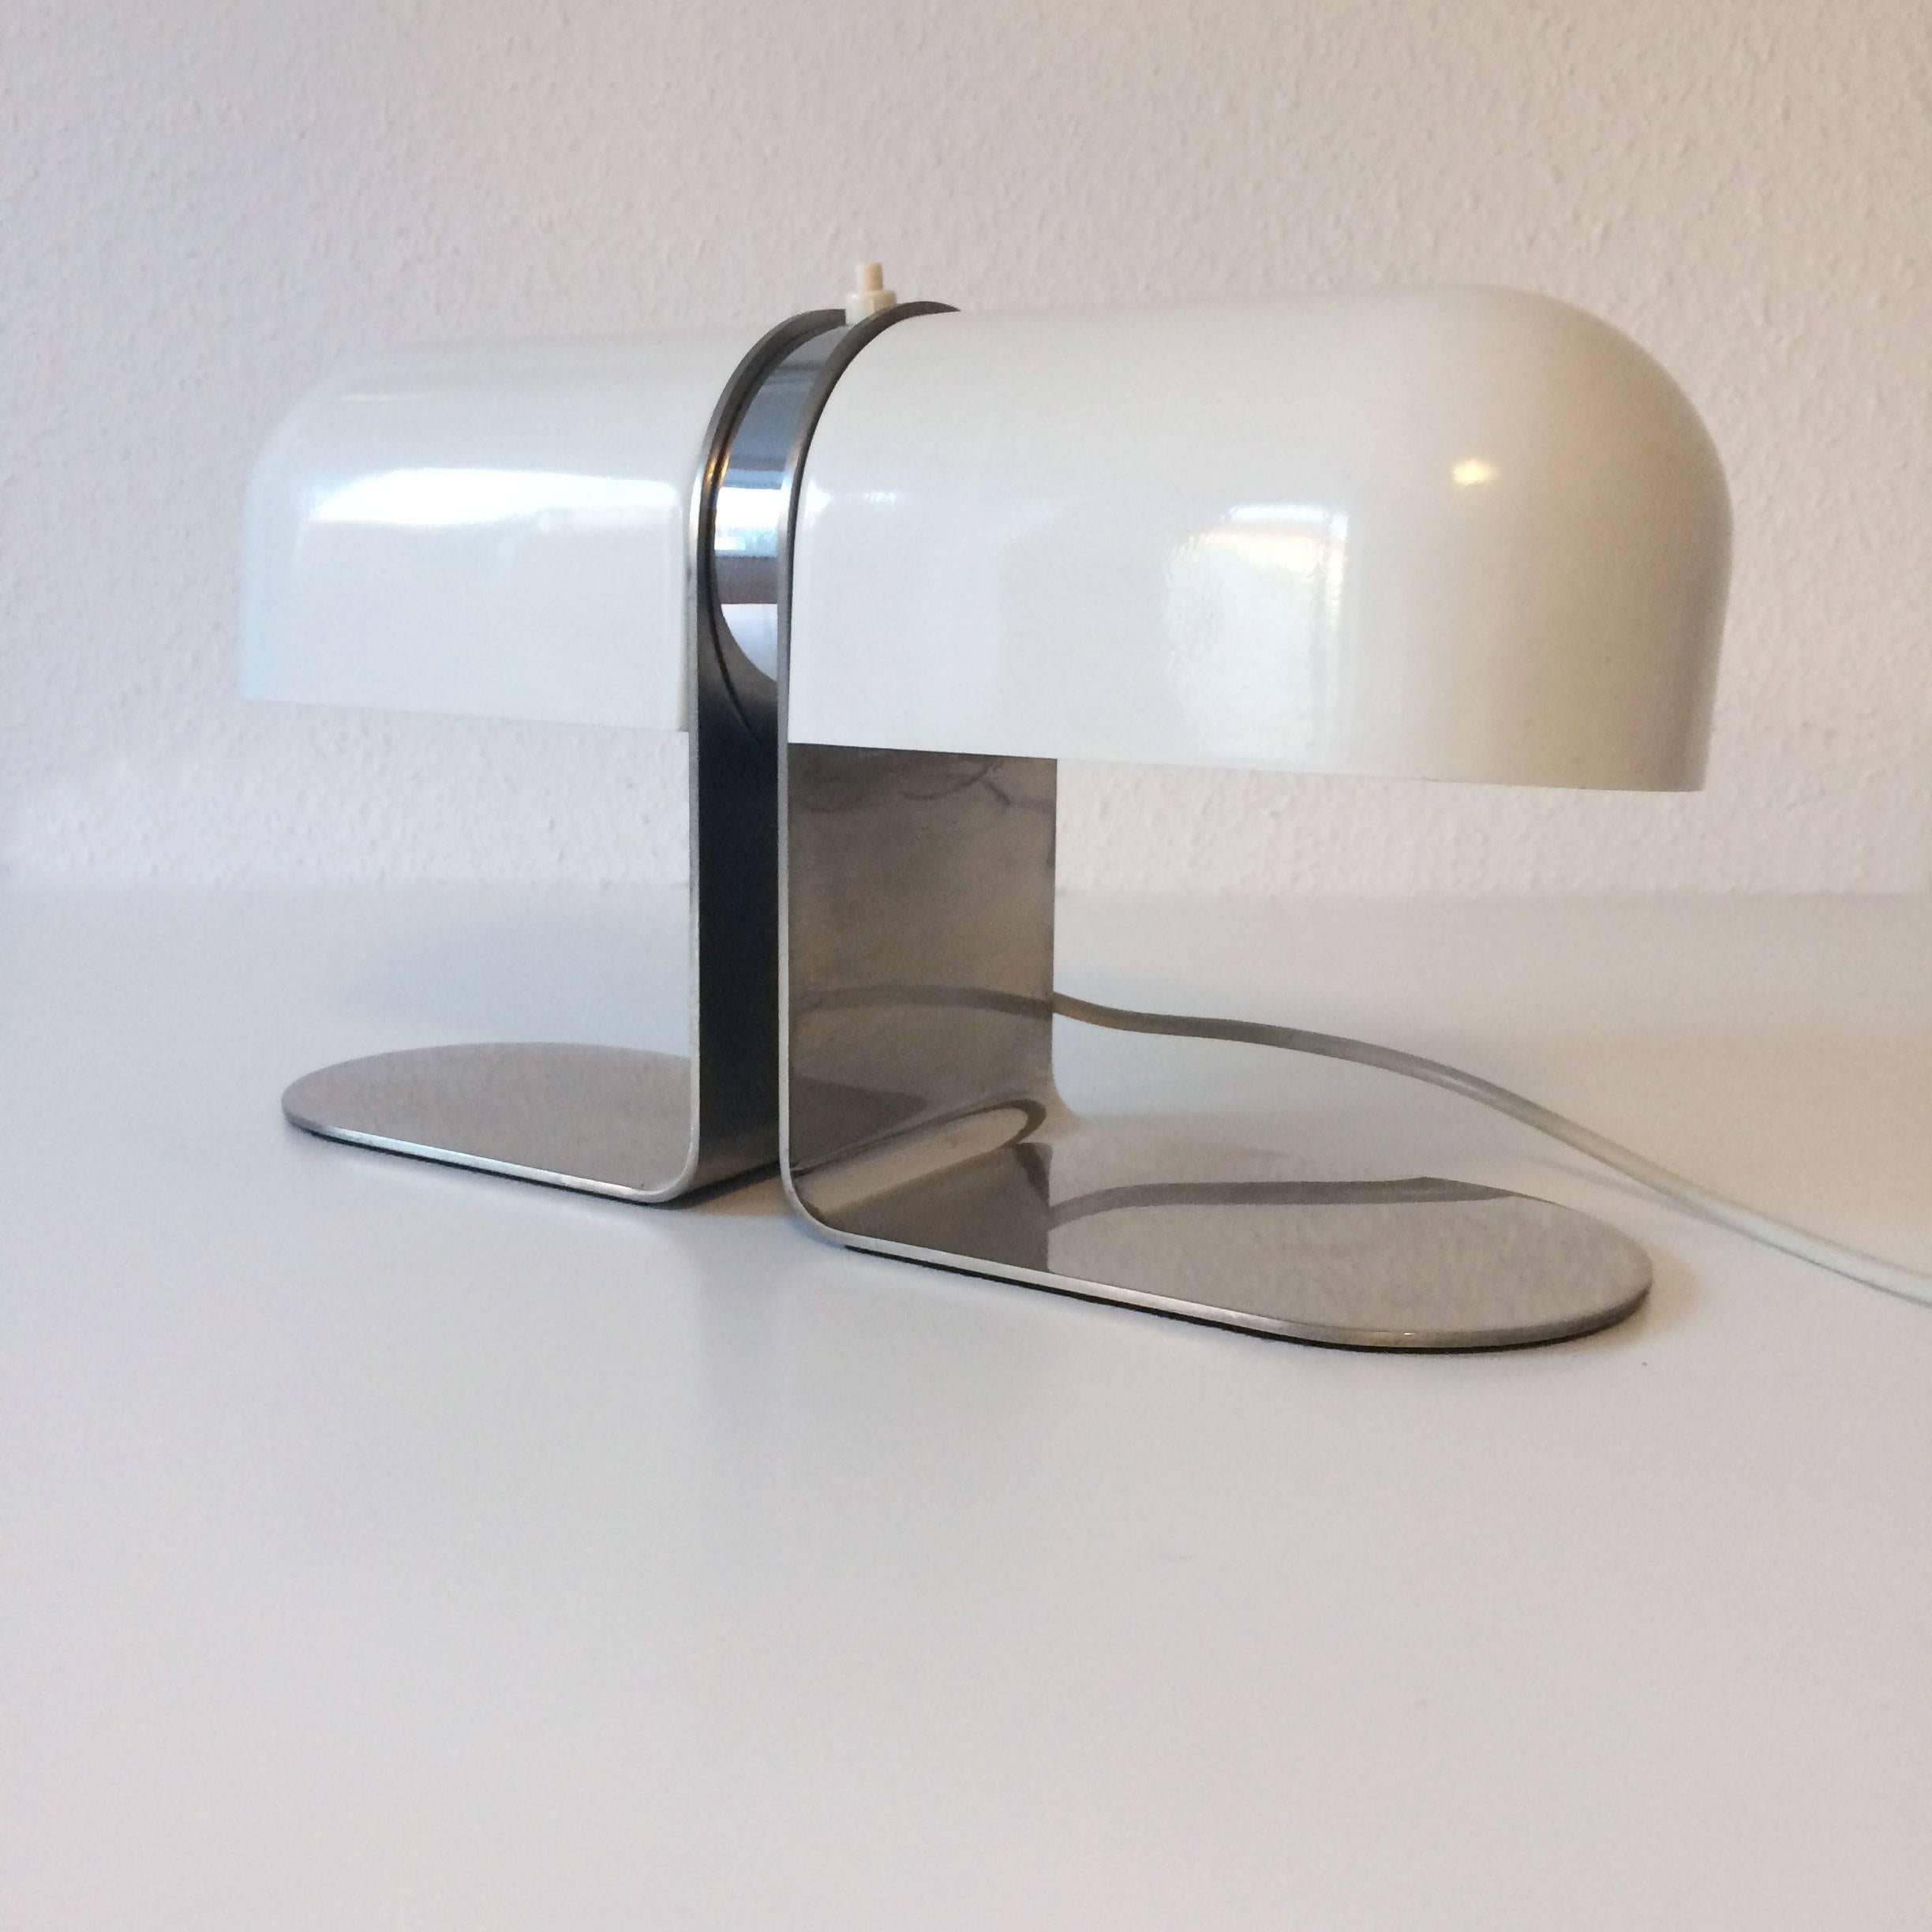 Late 20th Century Rare Mid Century Modern Table Lamp or Desk Light by Andre Ricard for Metalarte For Sale